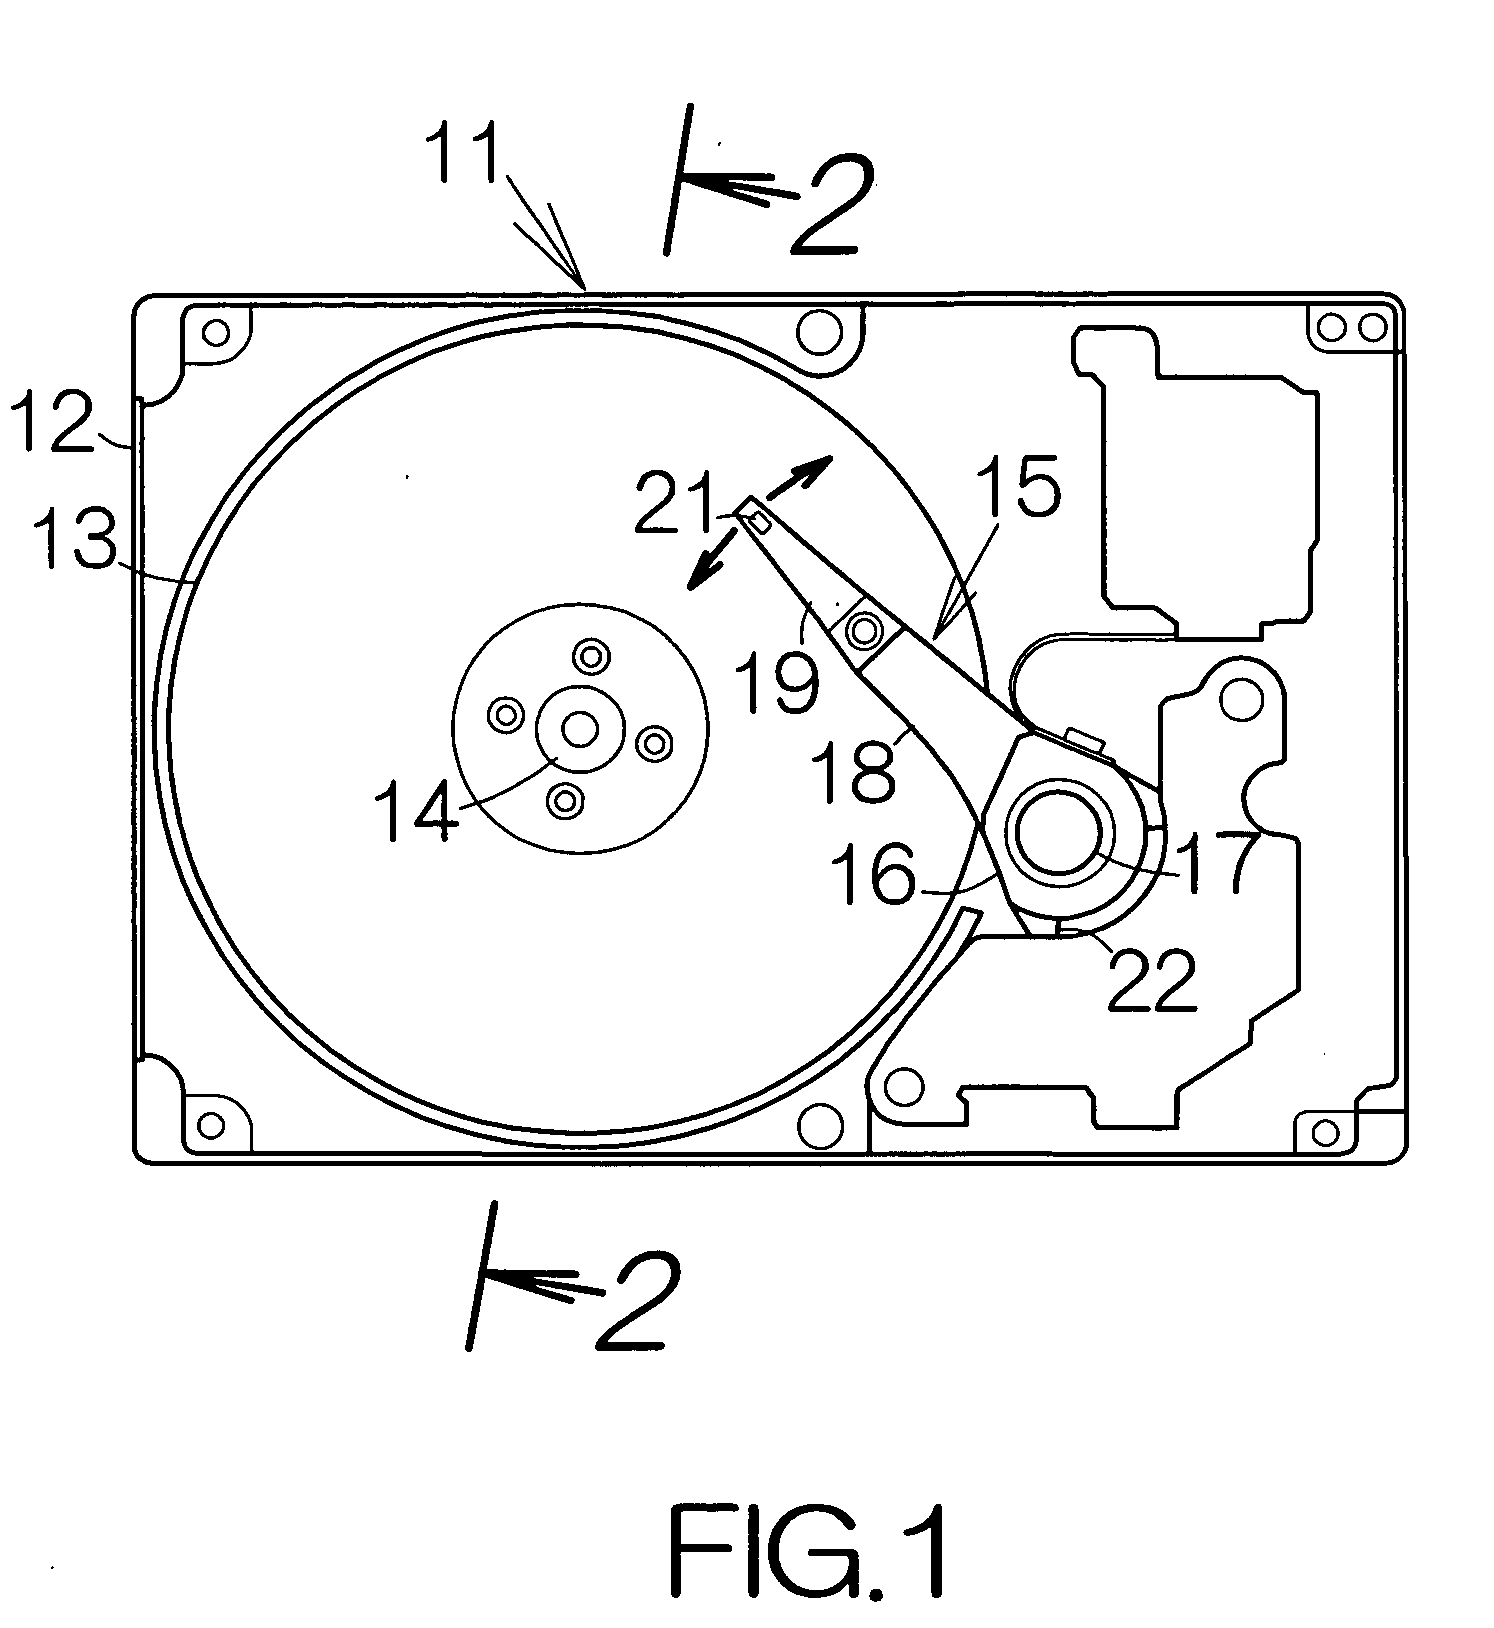 Recording disk drive capable of reducing vibration within enclosure